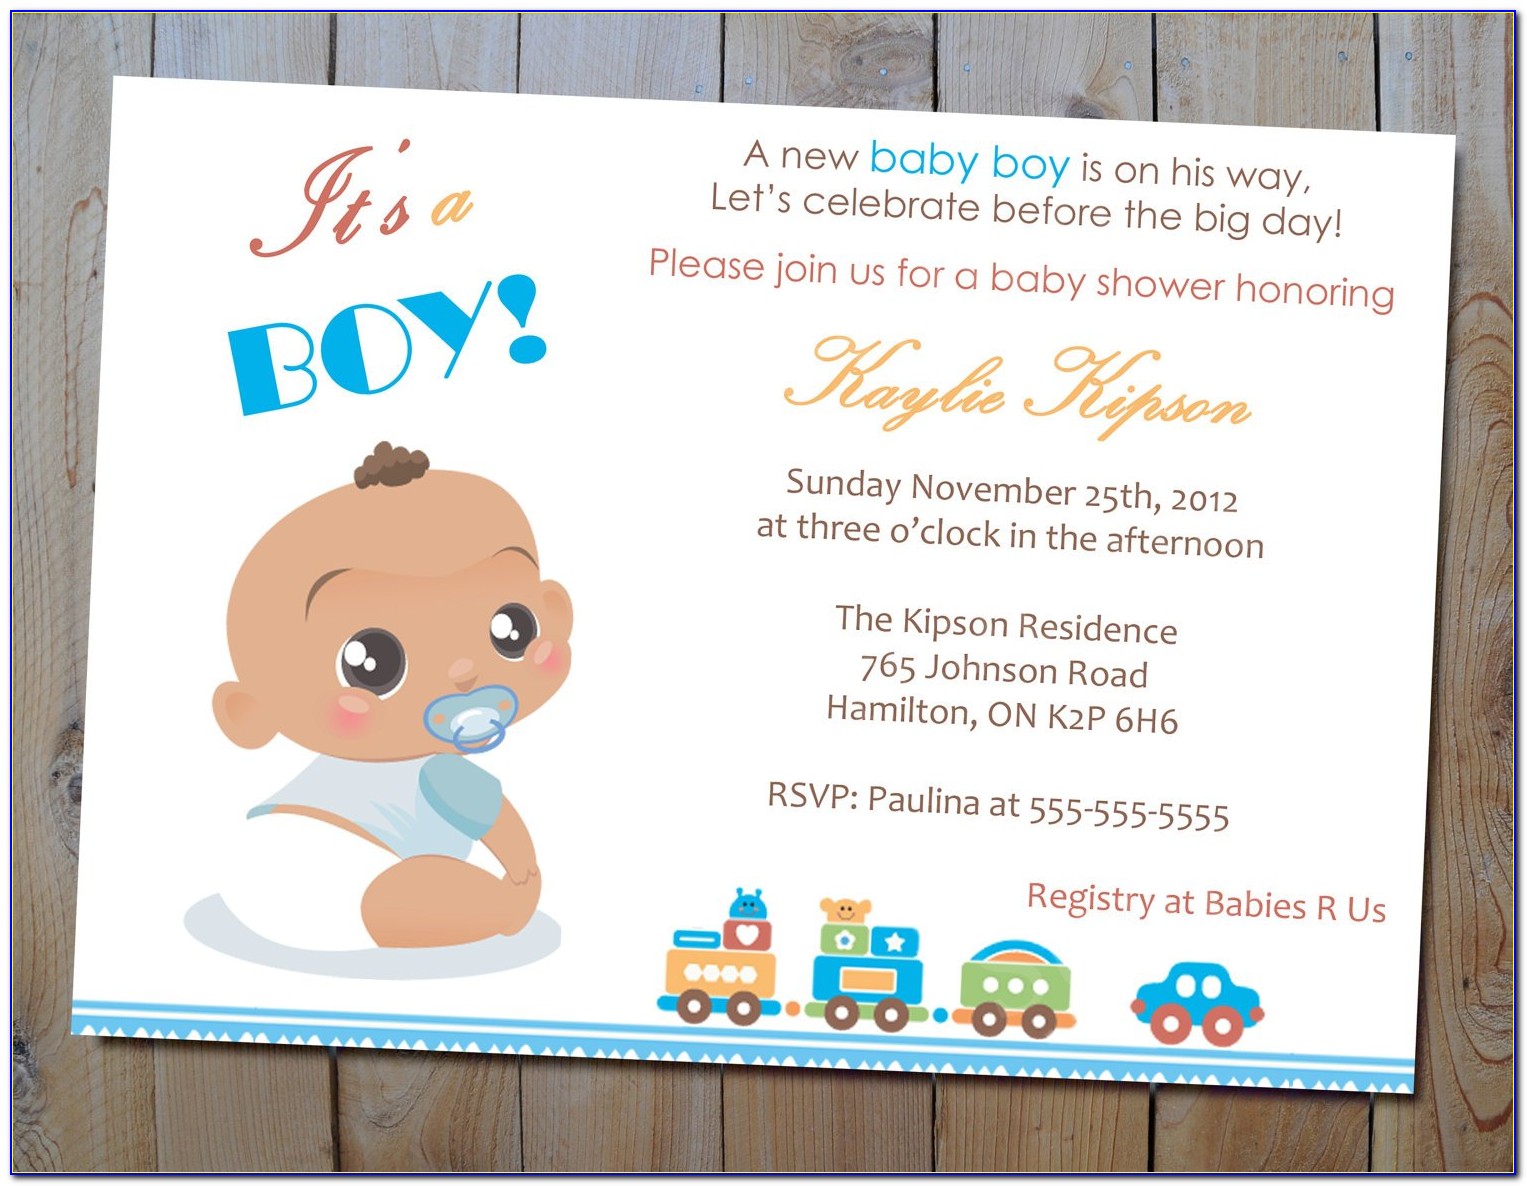 Baby Baptism Certificate Template